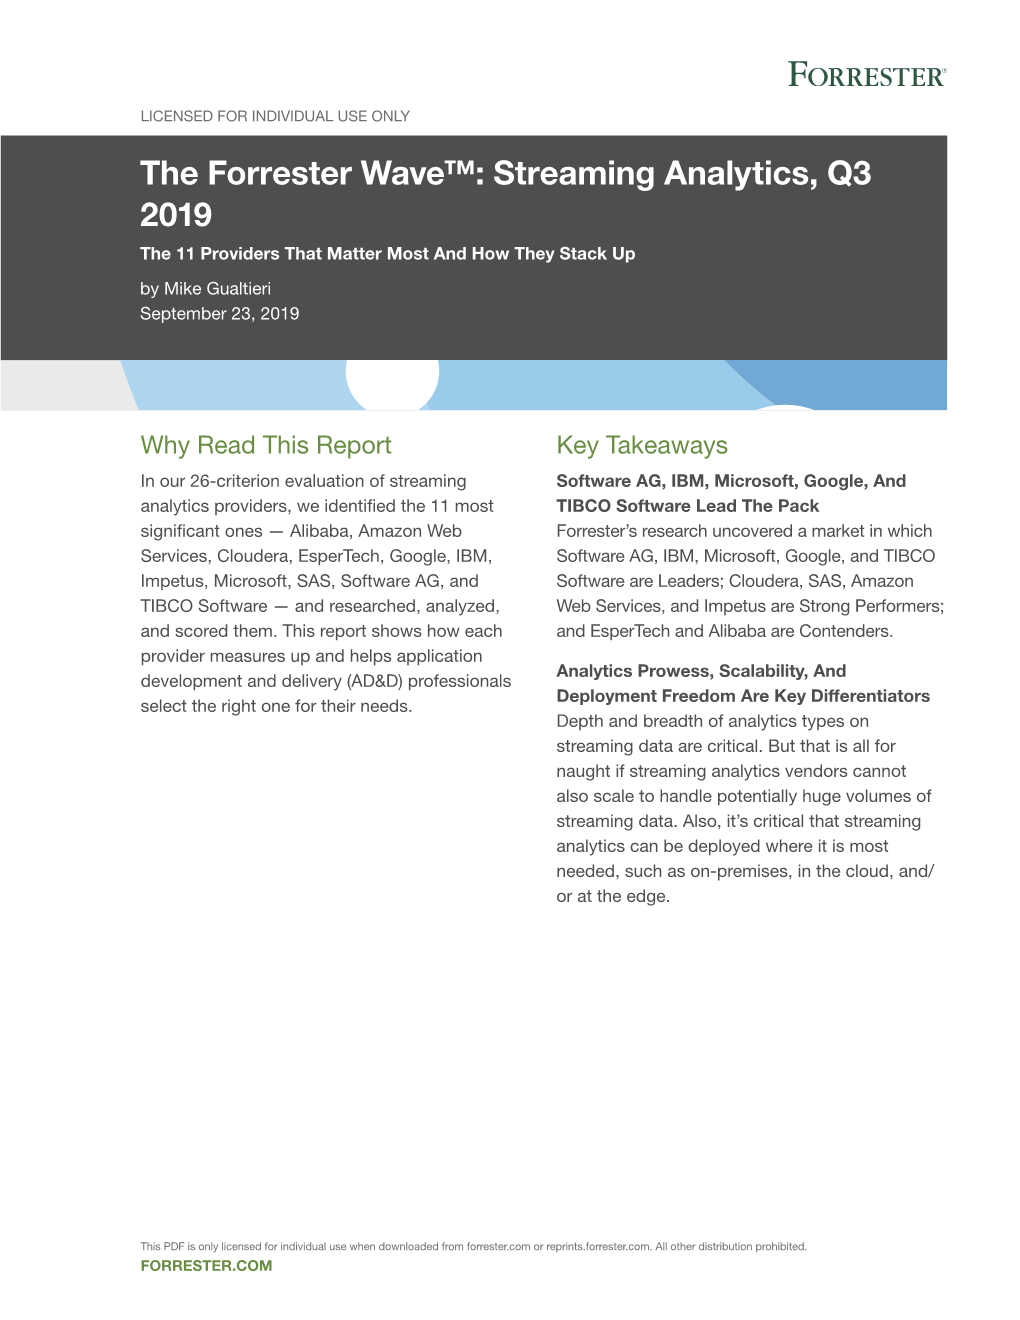 The Forrester Wave™: Streaming Analytics, Q3 2019 the 11 Providers That Matter Most and How They Stack up by Mike Gualtieri September 23, 2019